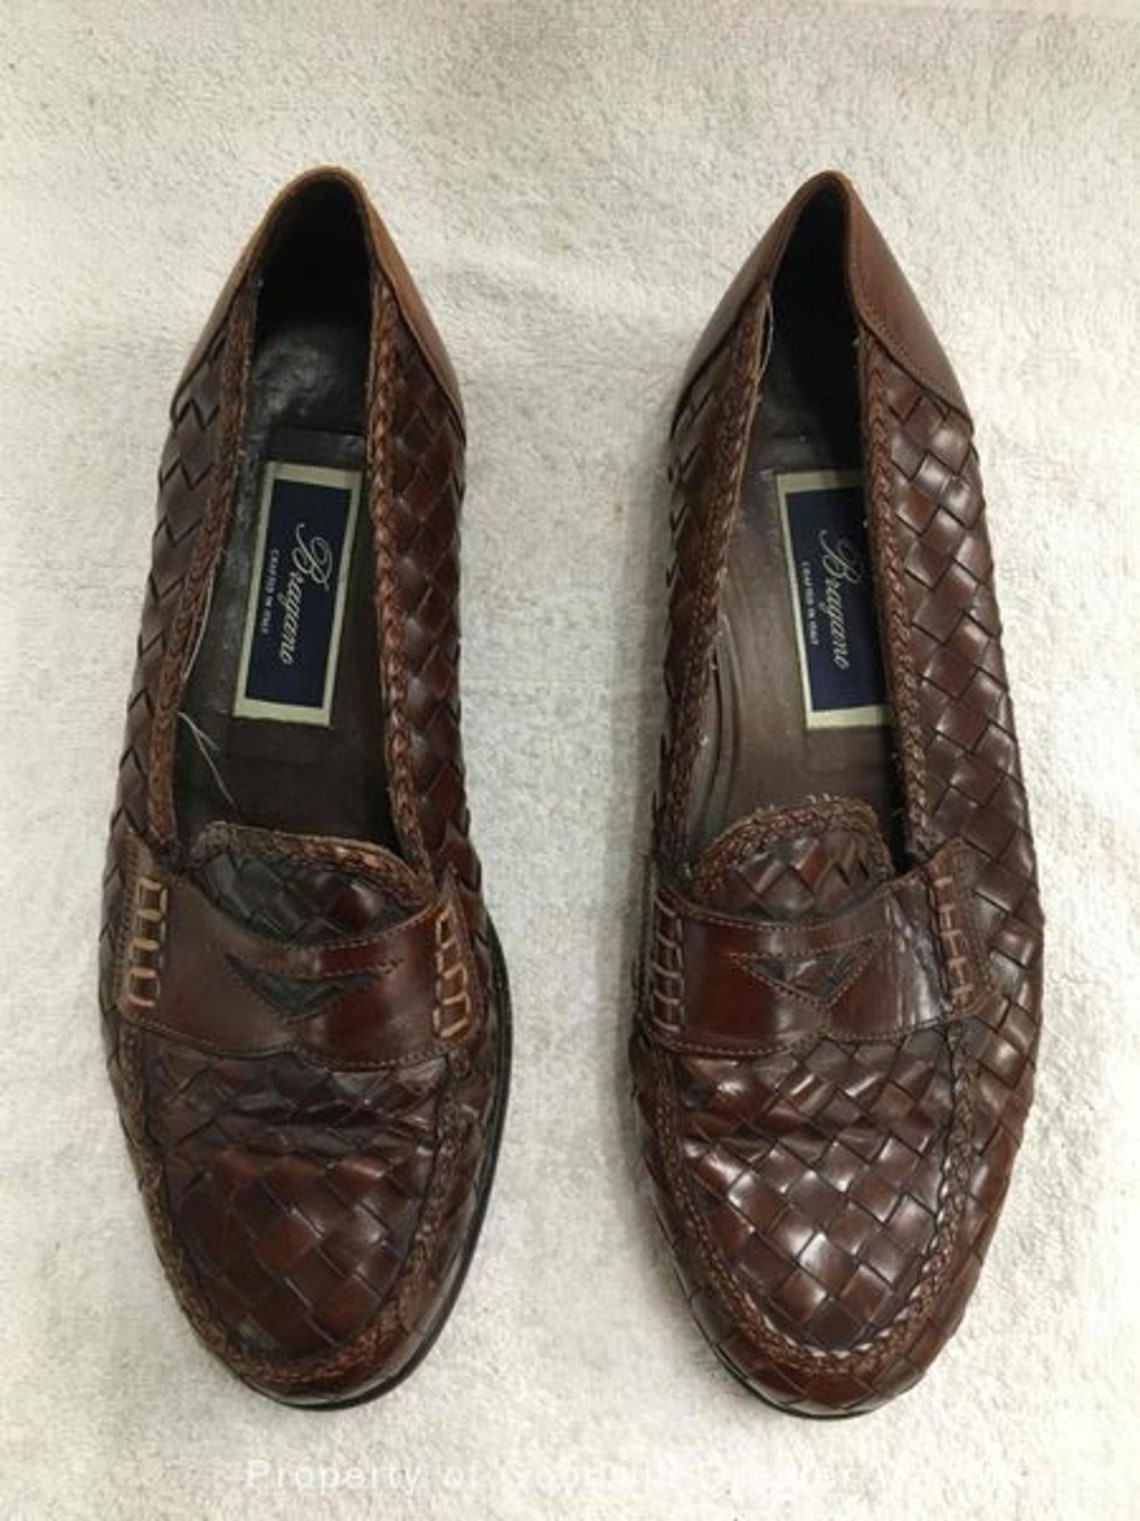 Bragano Italy Men's Weaved Leather Loafer Shoe Size 8.5M | Etsy